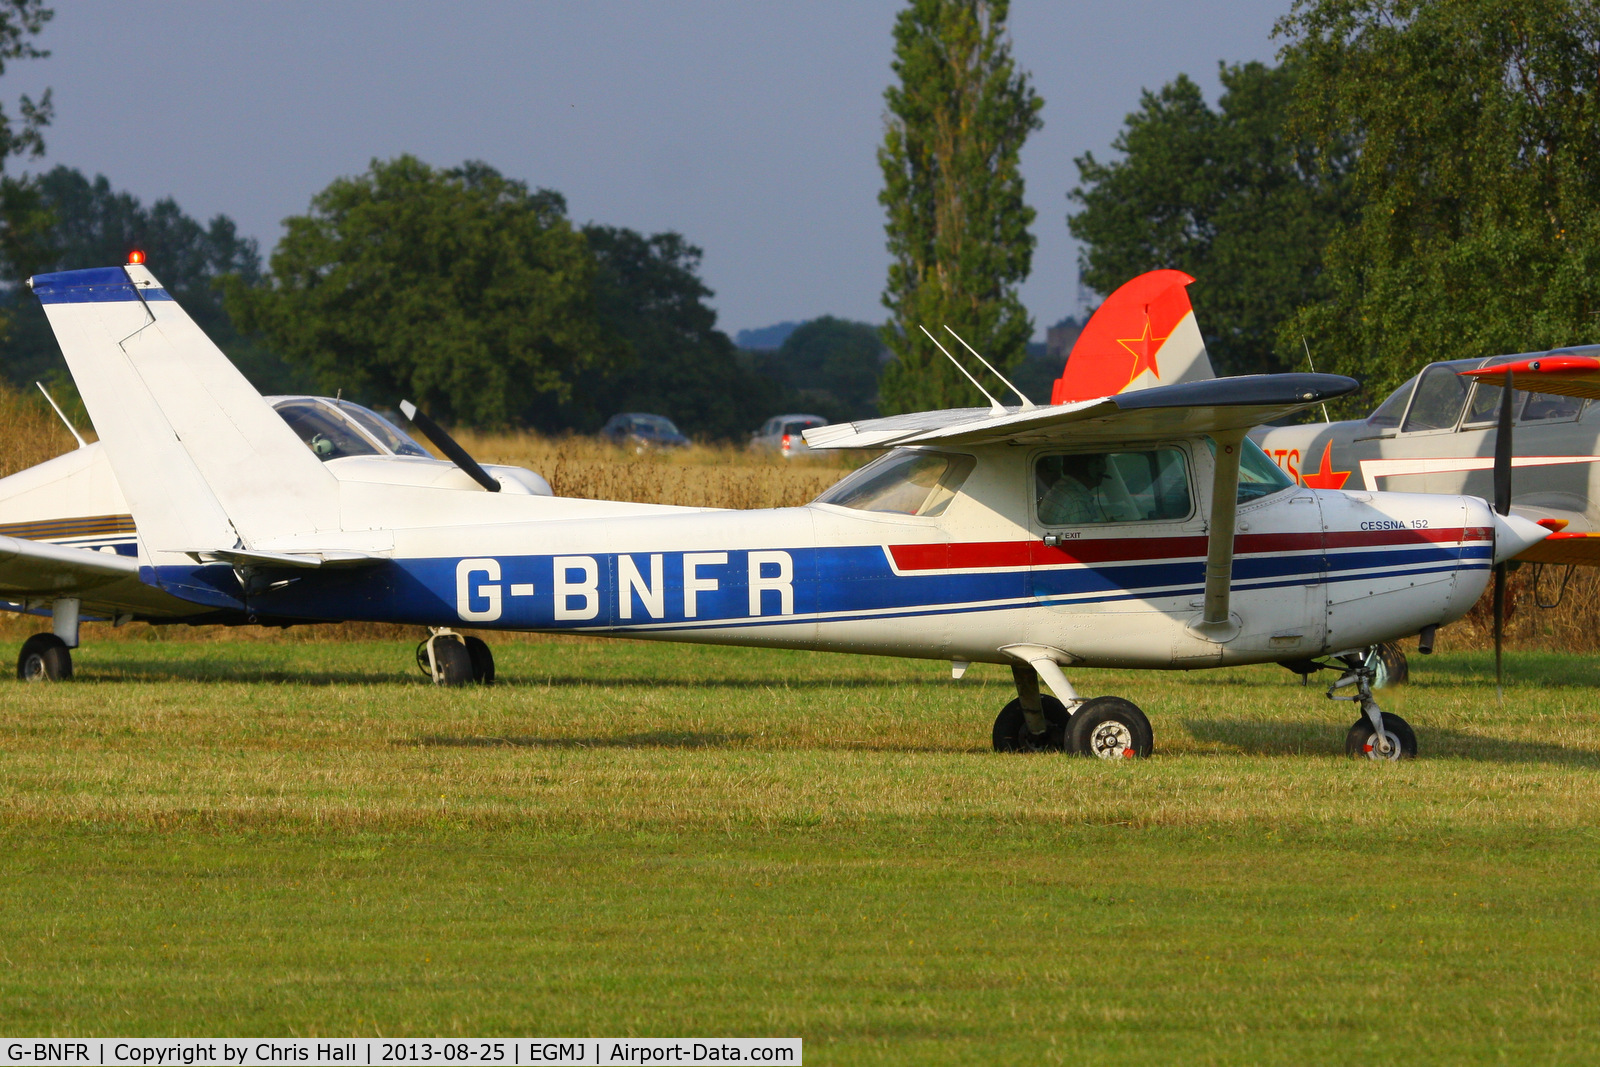 G-BNFR, 1978 Cessna 152 C/N 15282035, at the Little Gransden Air & Vintage Vehicle Show